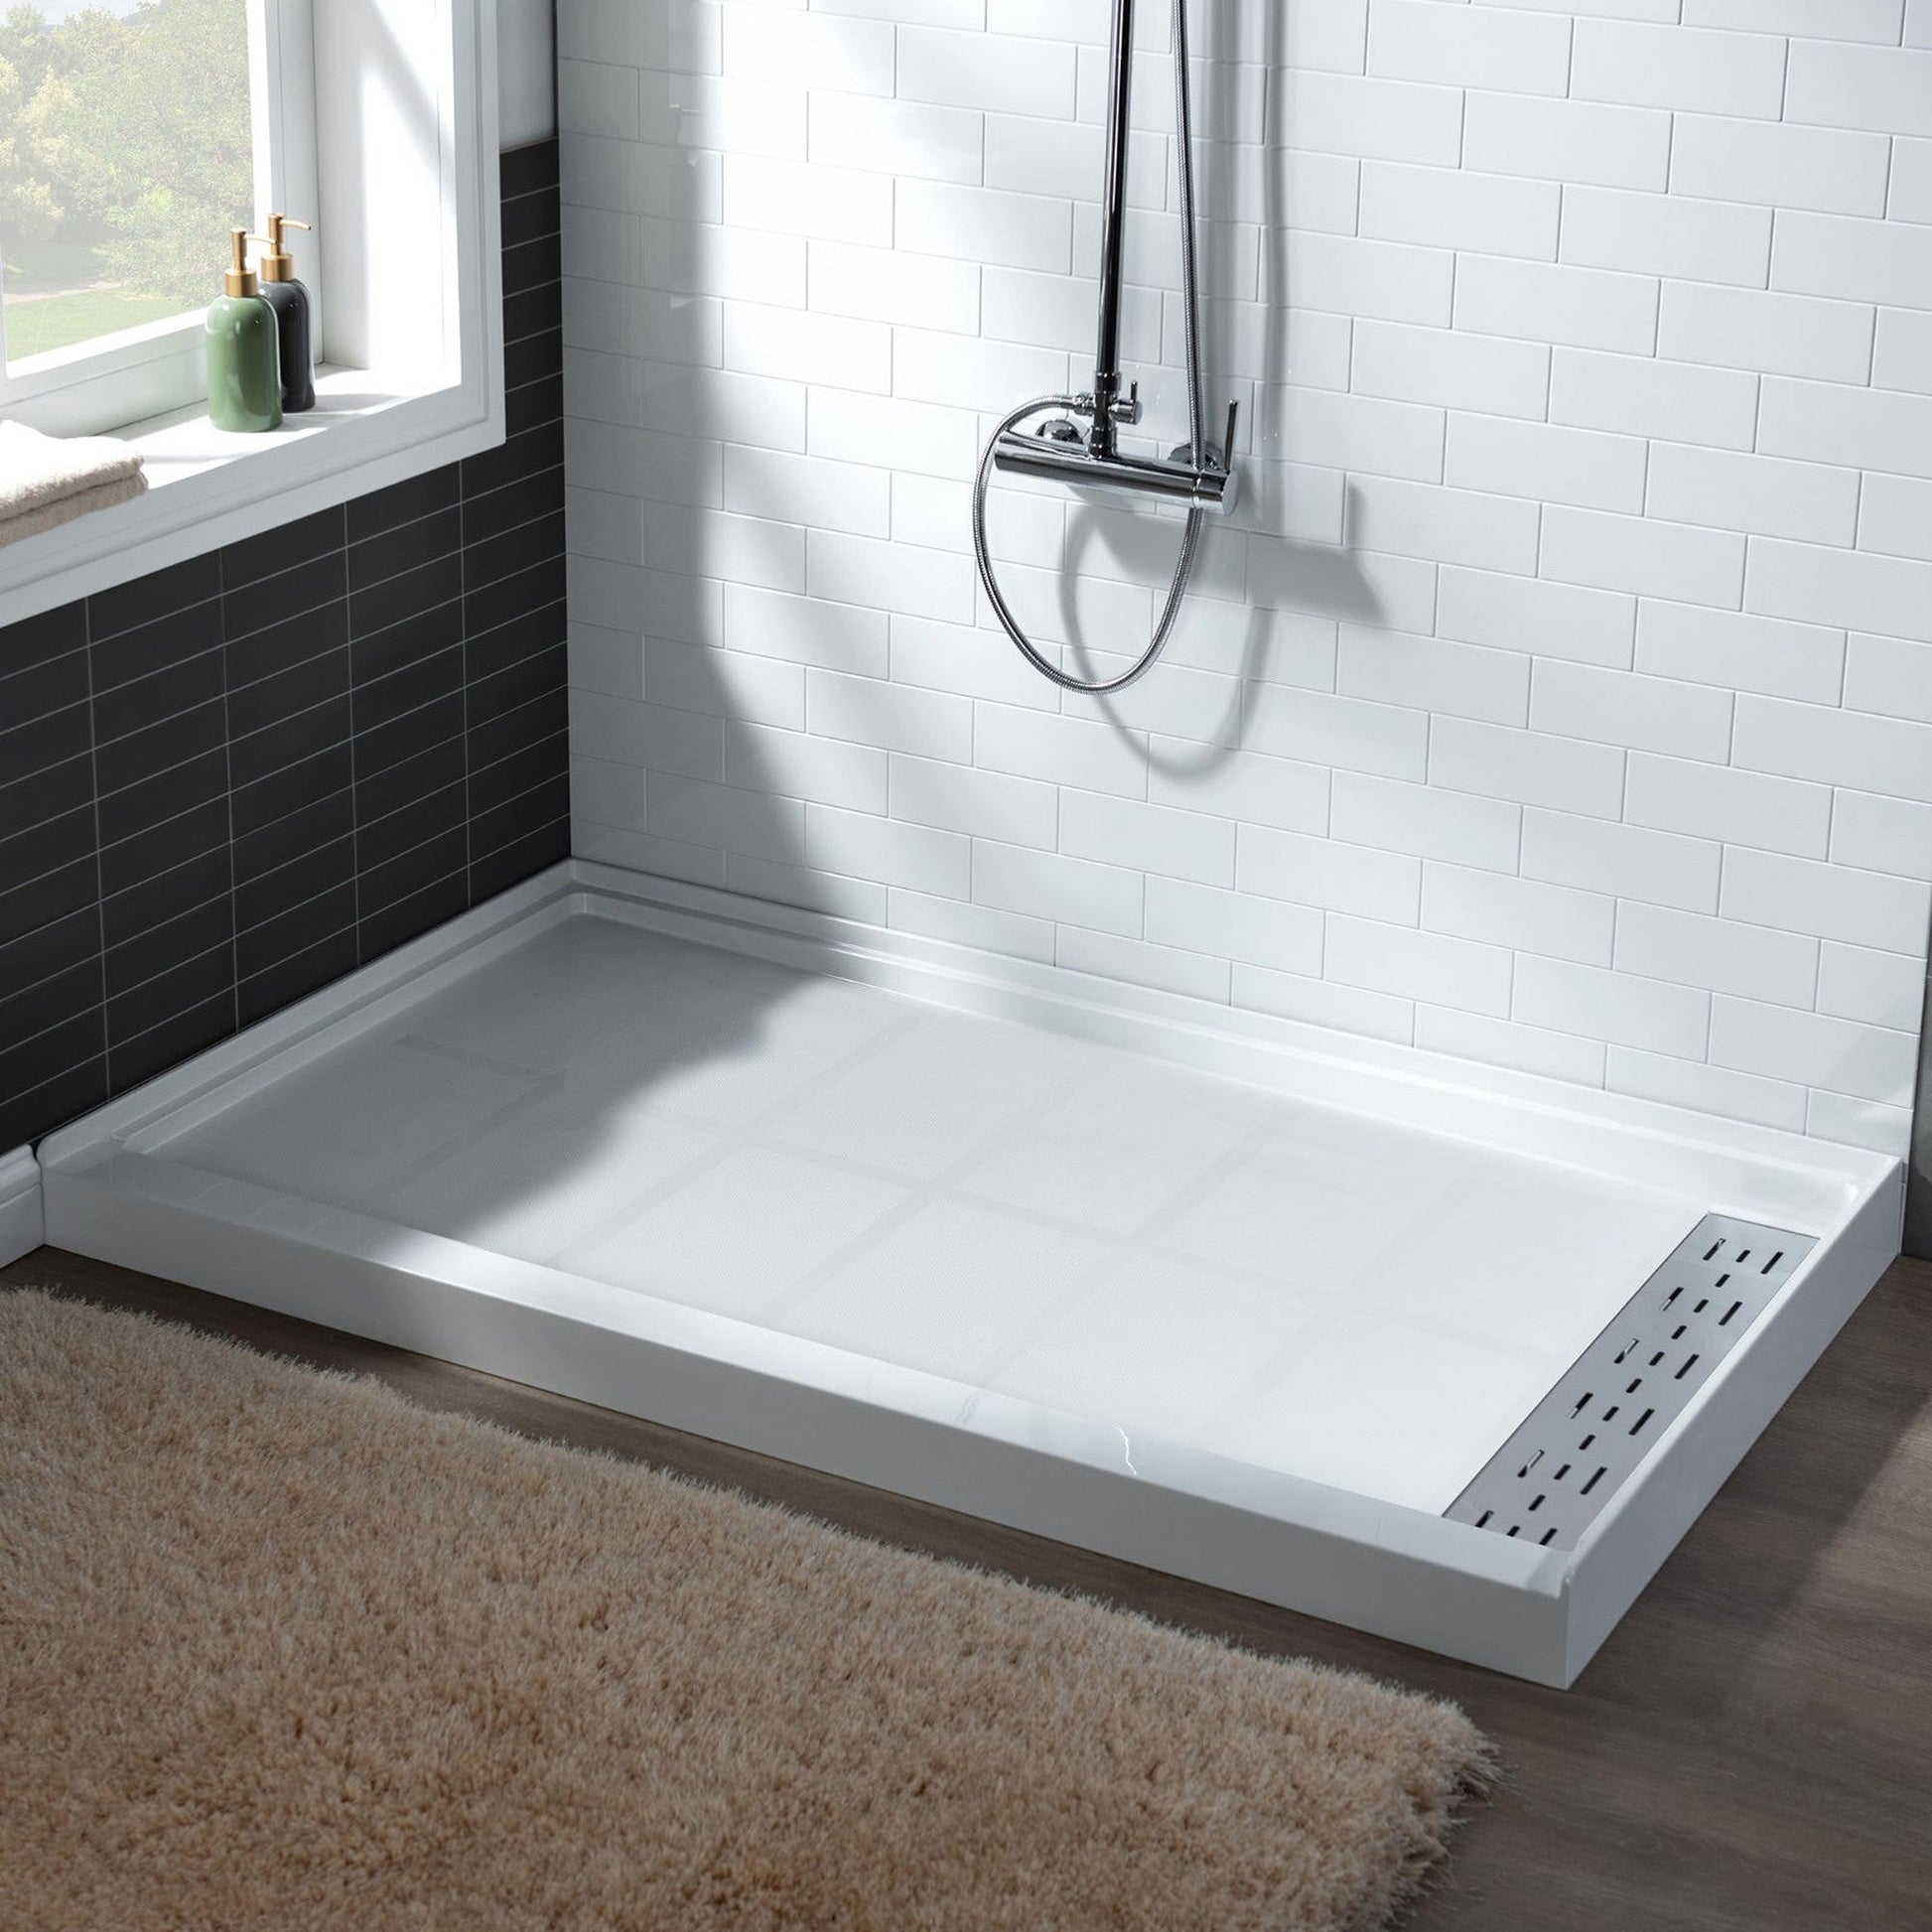 WoodBridge 48" x 36" White Solid Surface Shower Base Right Drain Location With Chrome Trench Drain Cover